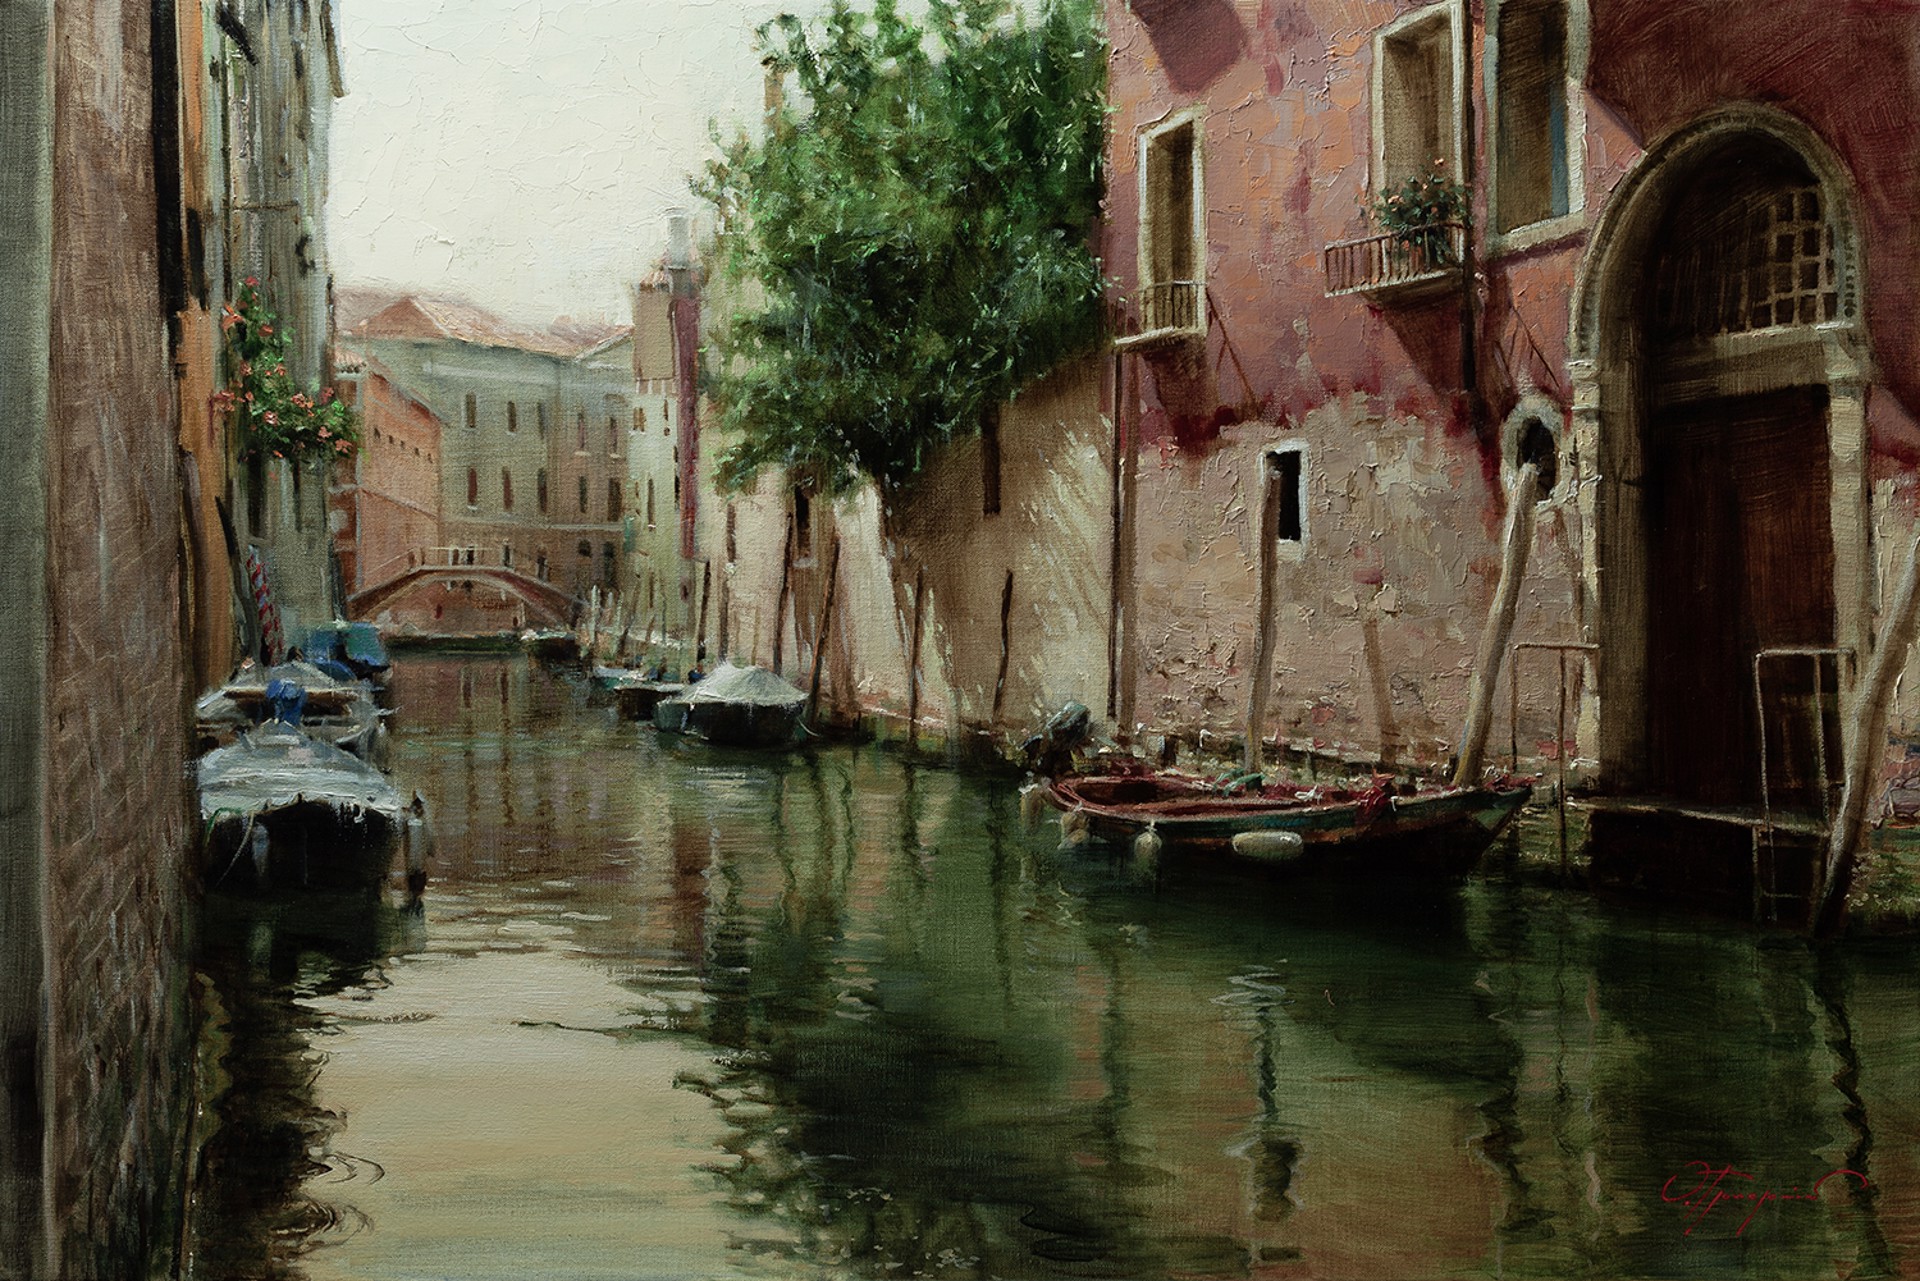 Silence of the Venetian Canals by Oleg Trofimov